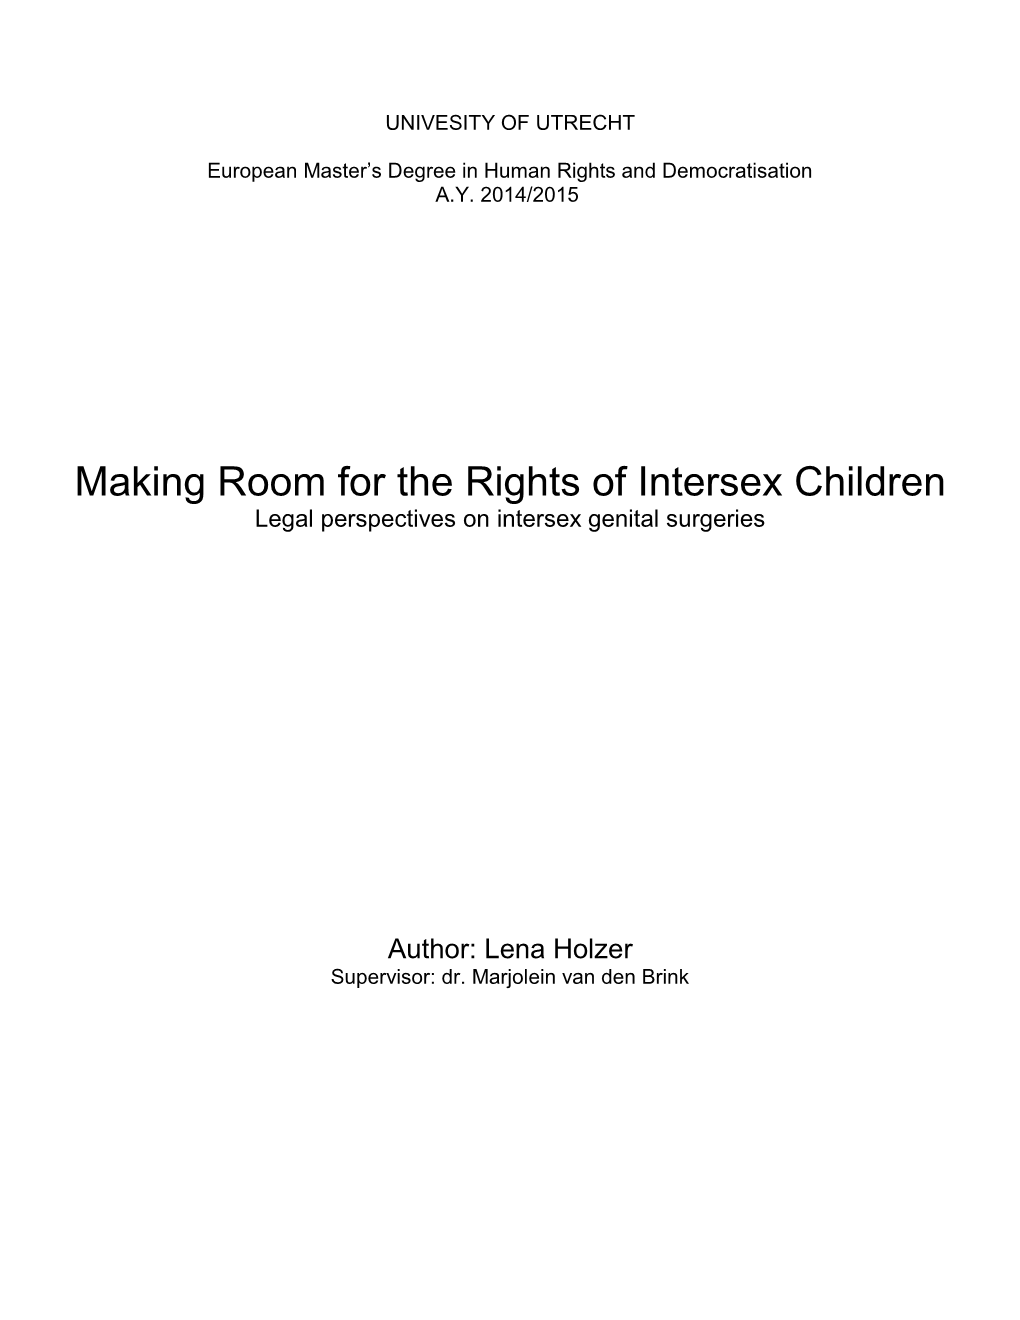 Making Room for the Rights of Intersex Children Legal Perspectives on Intersex Genital Surgeries